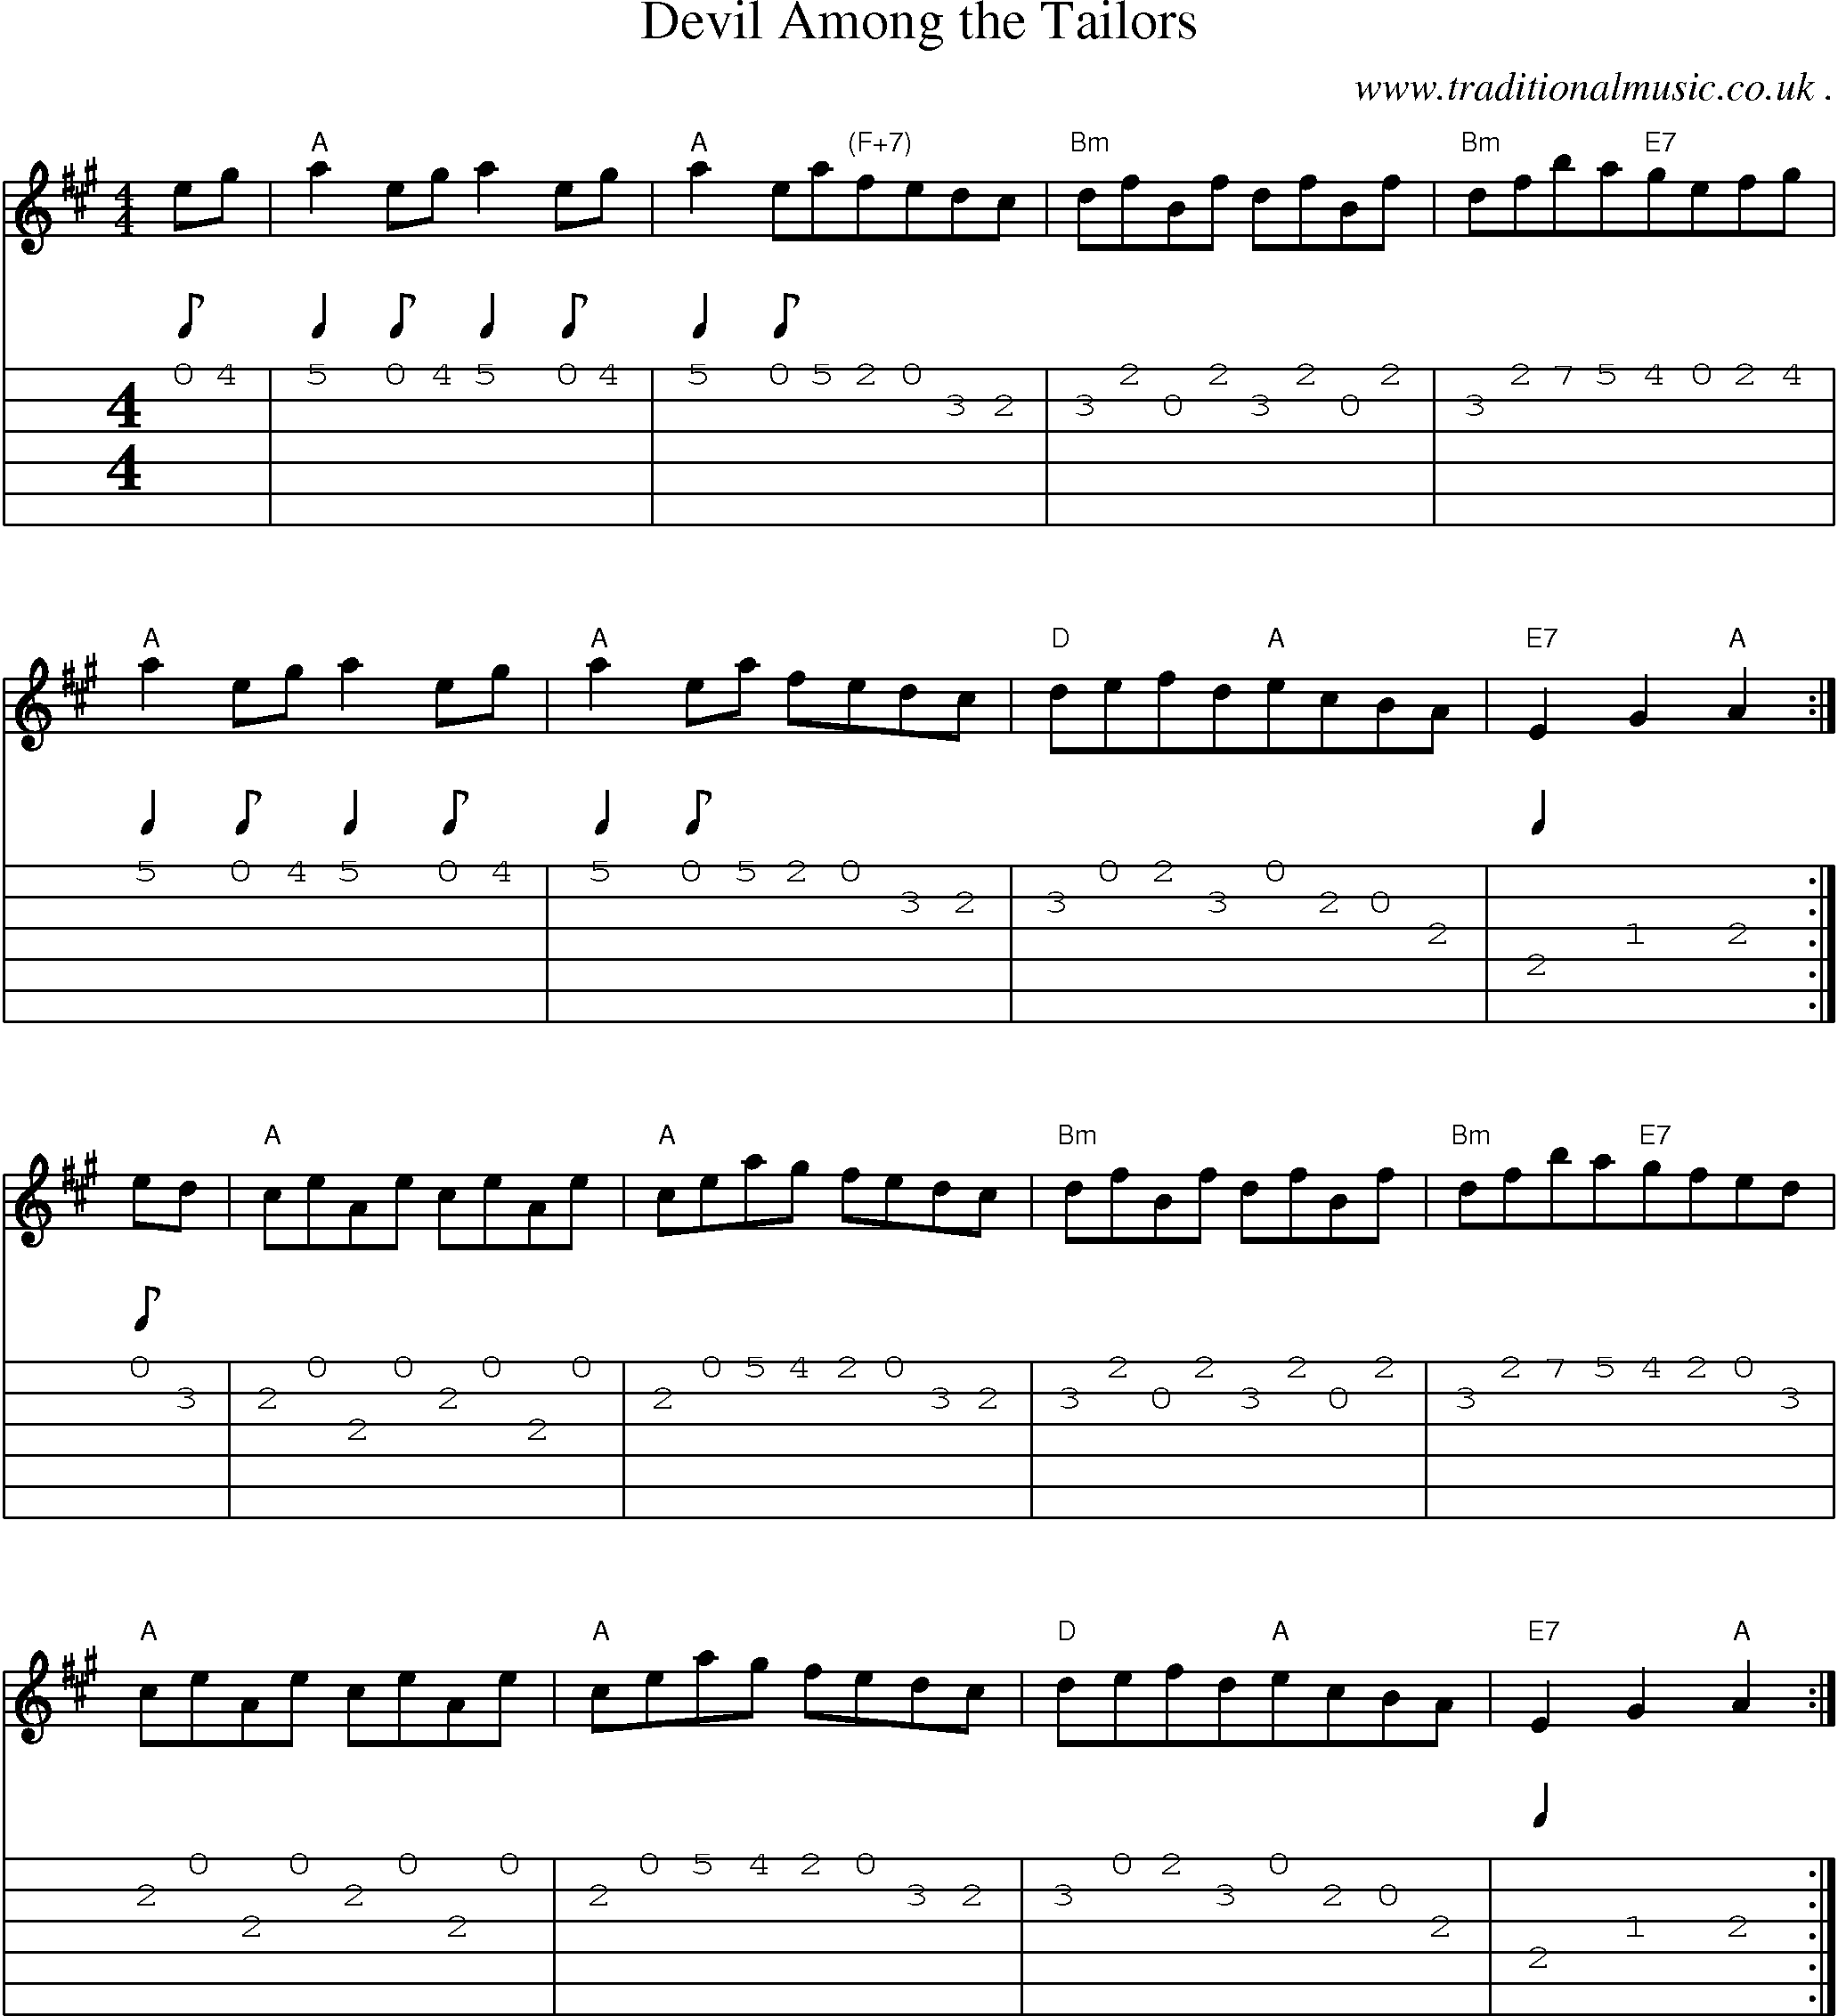 Sheet-Music and Guitar Tabs for Devil Among The Tailors